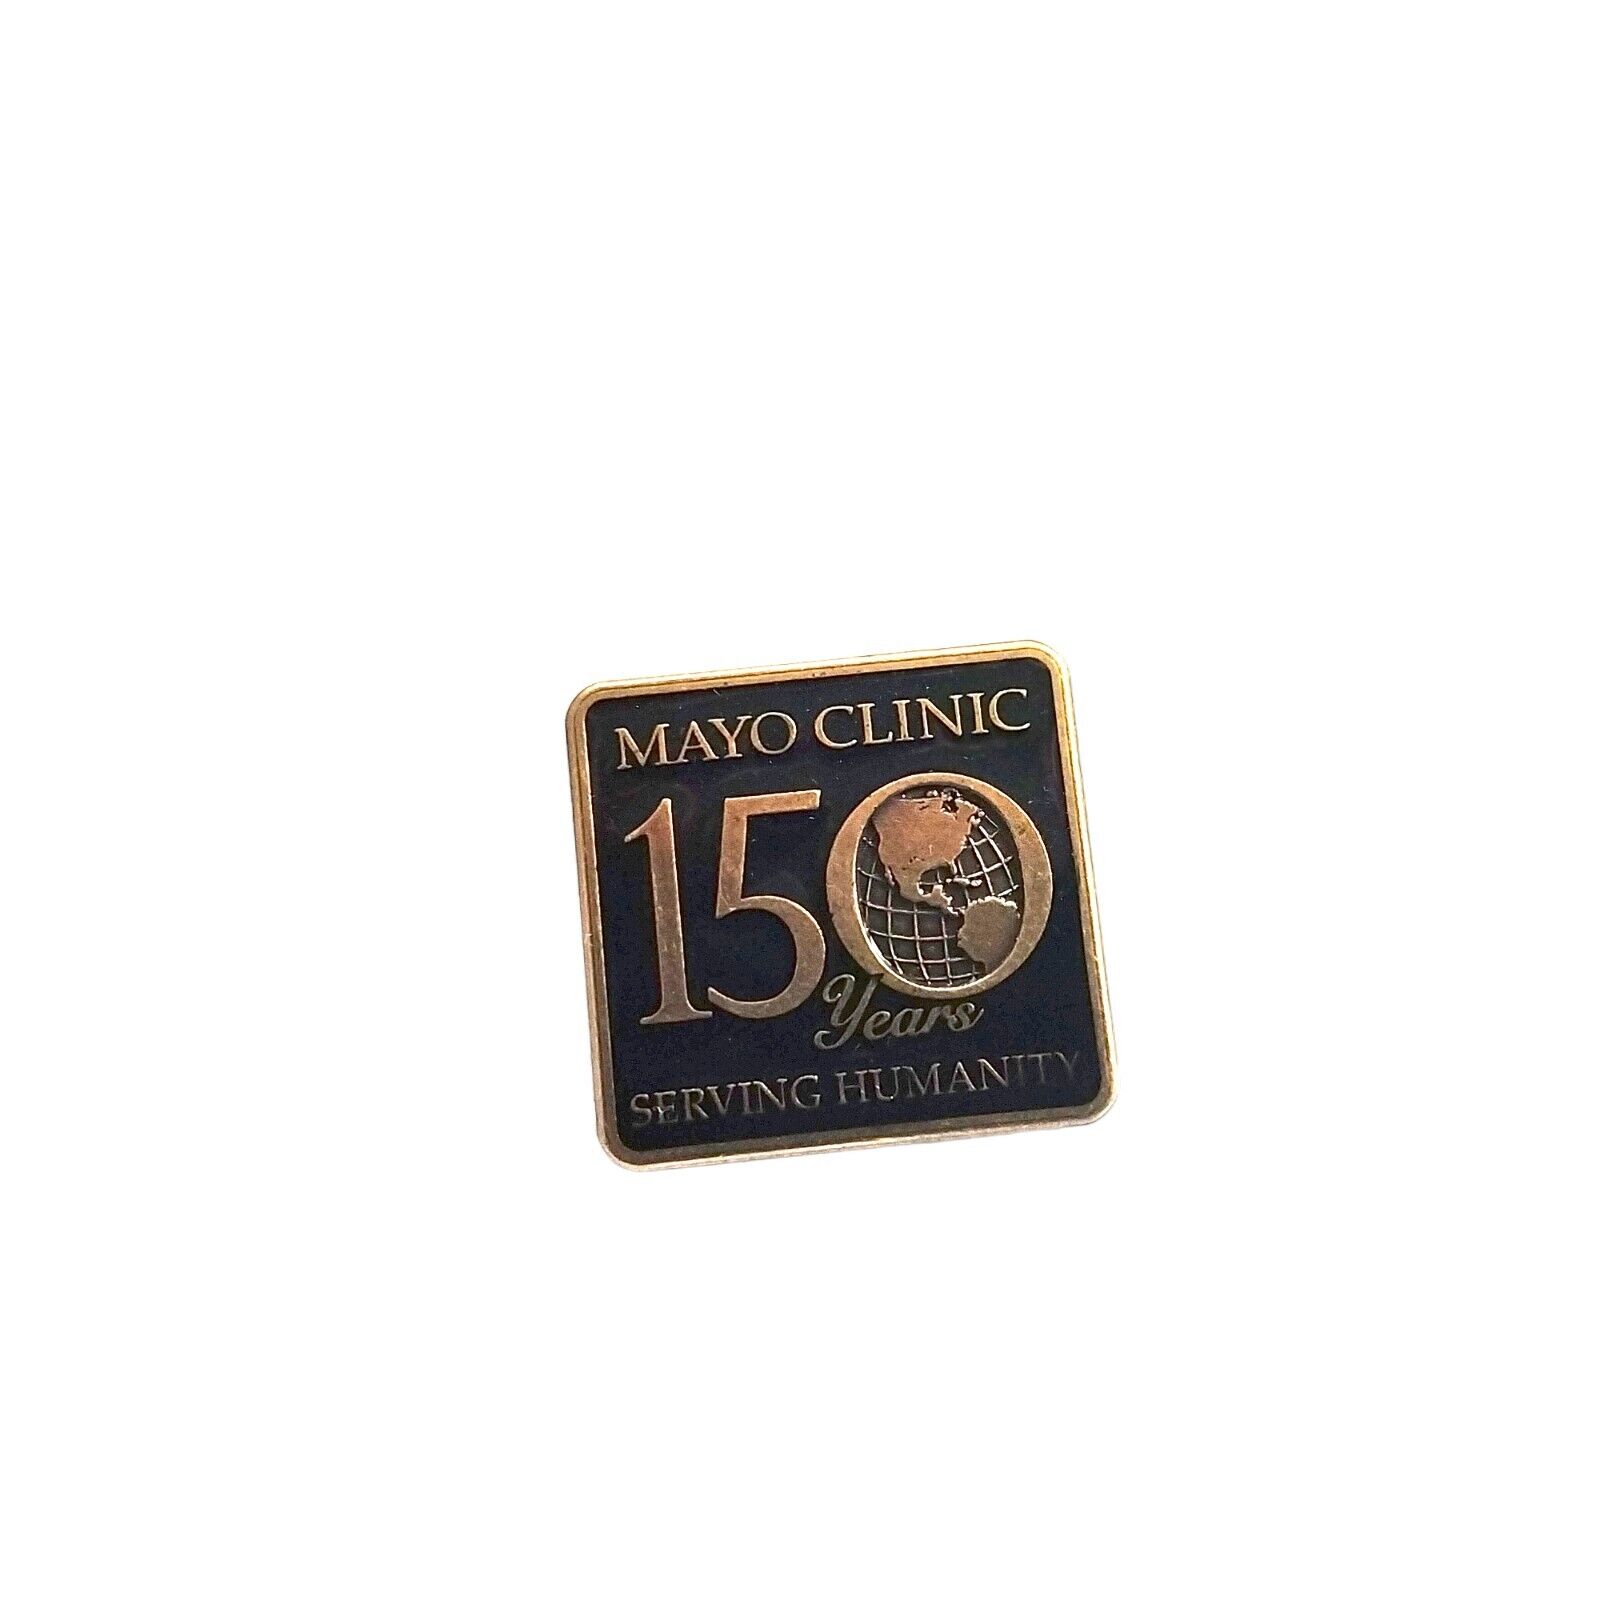 Mayo Clinic 150 Years Serving Humanity Medical Screwback Hat Jacket Pin